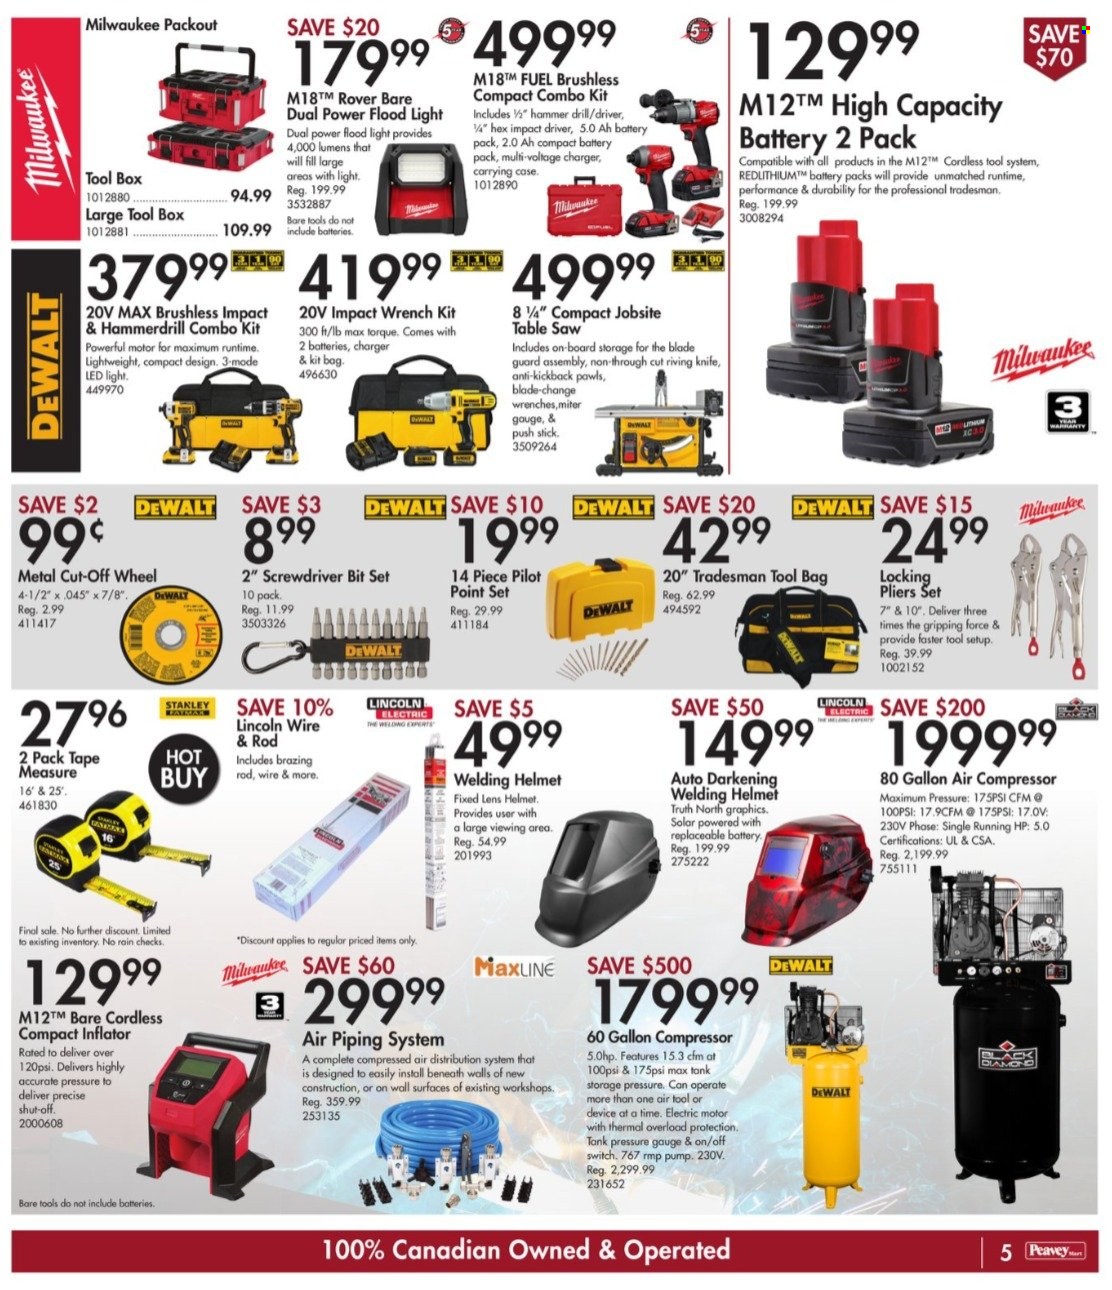 thumbnail - Peavey Mart Flyer - January 14, 2022 - January 20, 2022 - Sales products - knife, bag, Pilot, tank, table, DeWALT, Stanley, floodlight, Milwaukee, drill, impact driver, saw, table saw, screwdriver bits, pliers, tool box, combo kit, air compressor, measuring tape, welding helmet. Page 5.